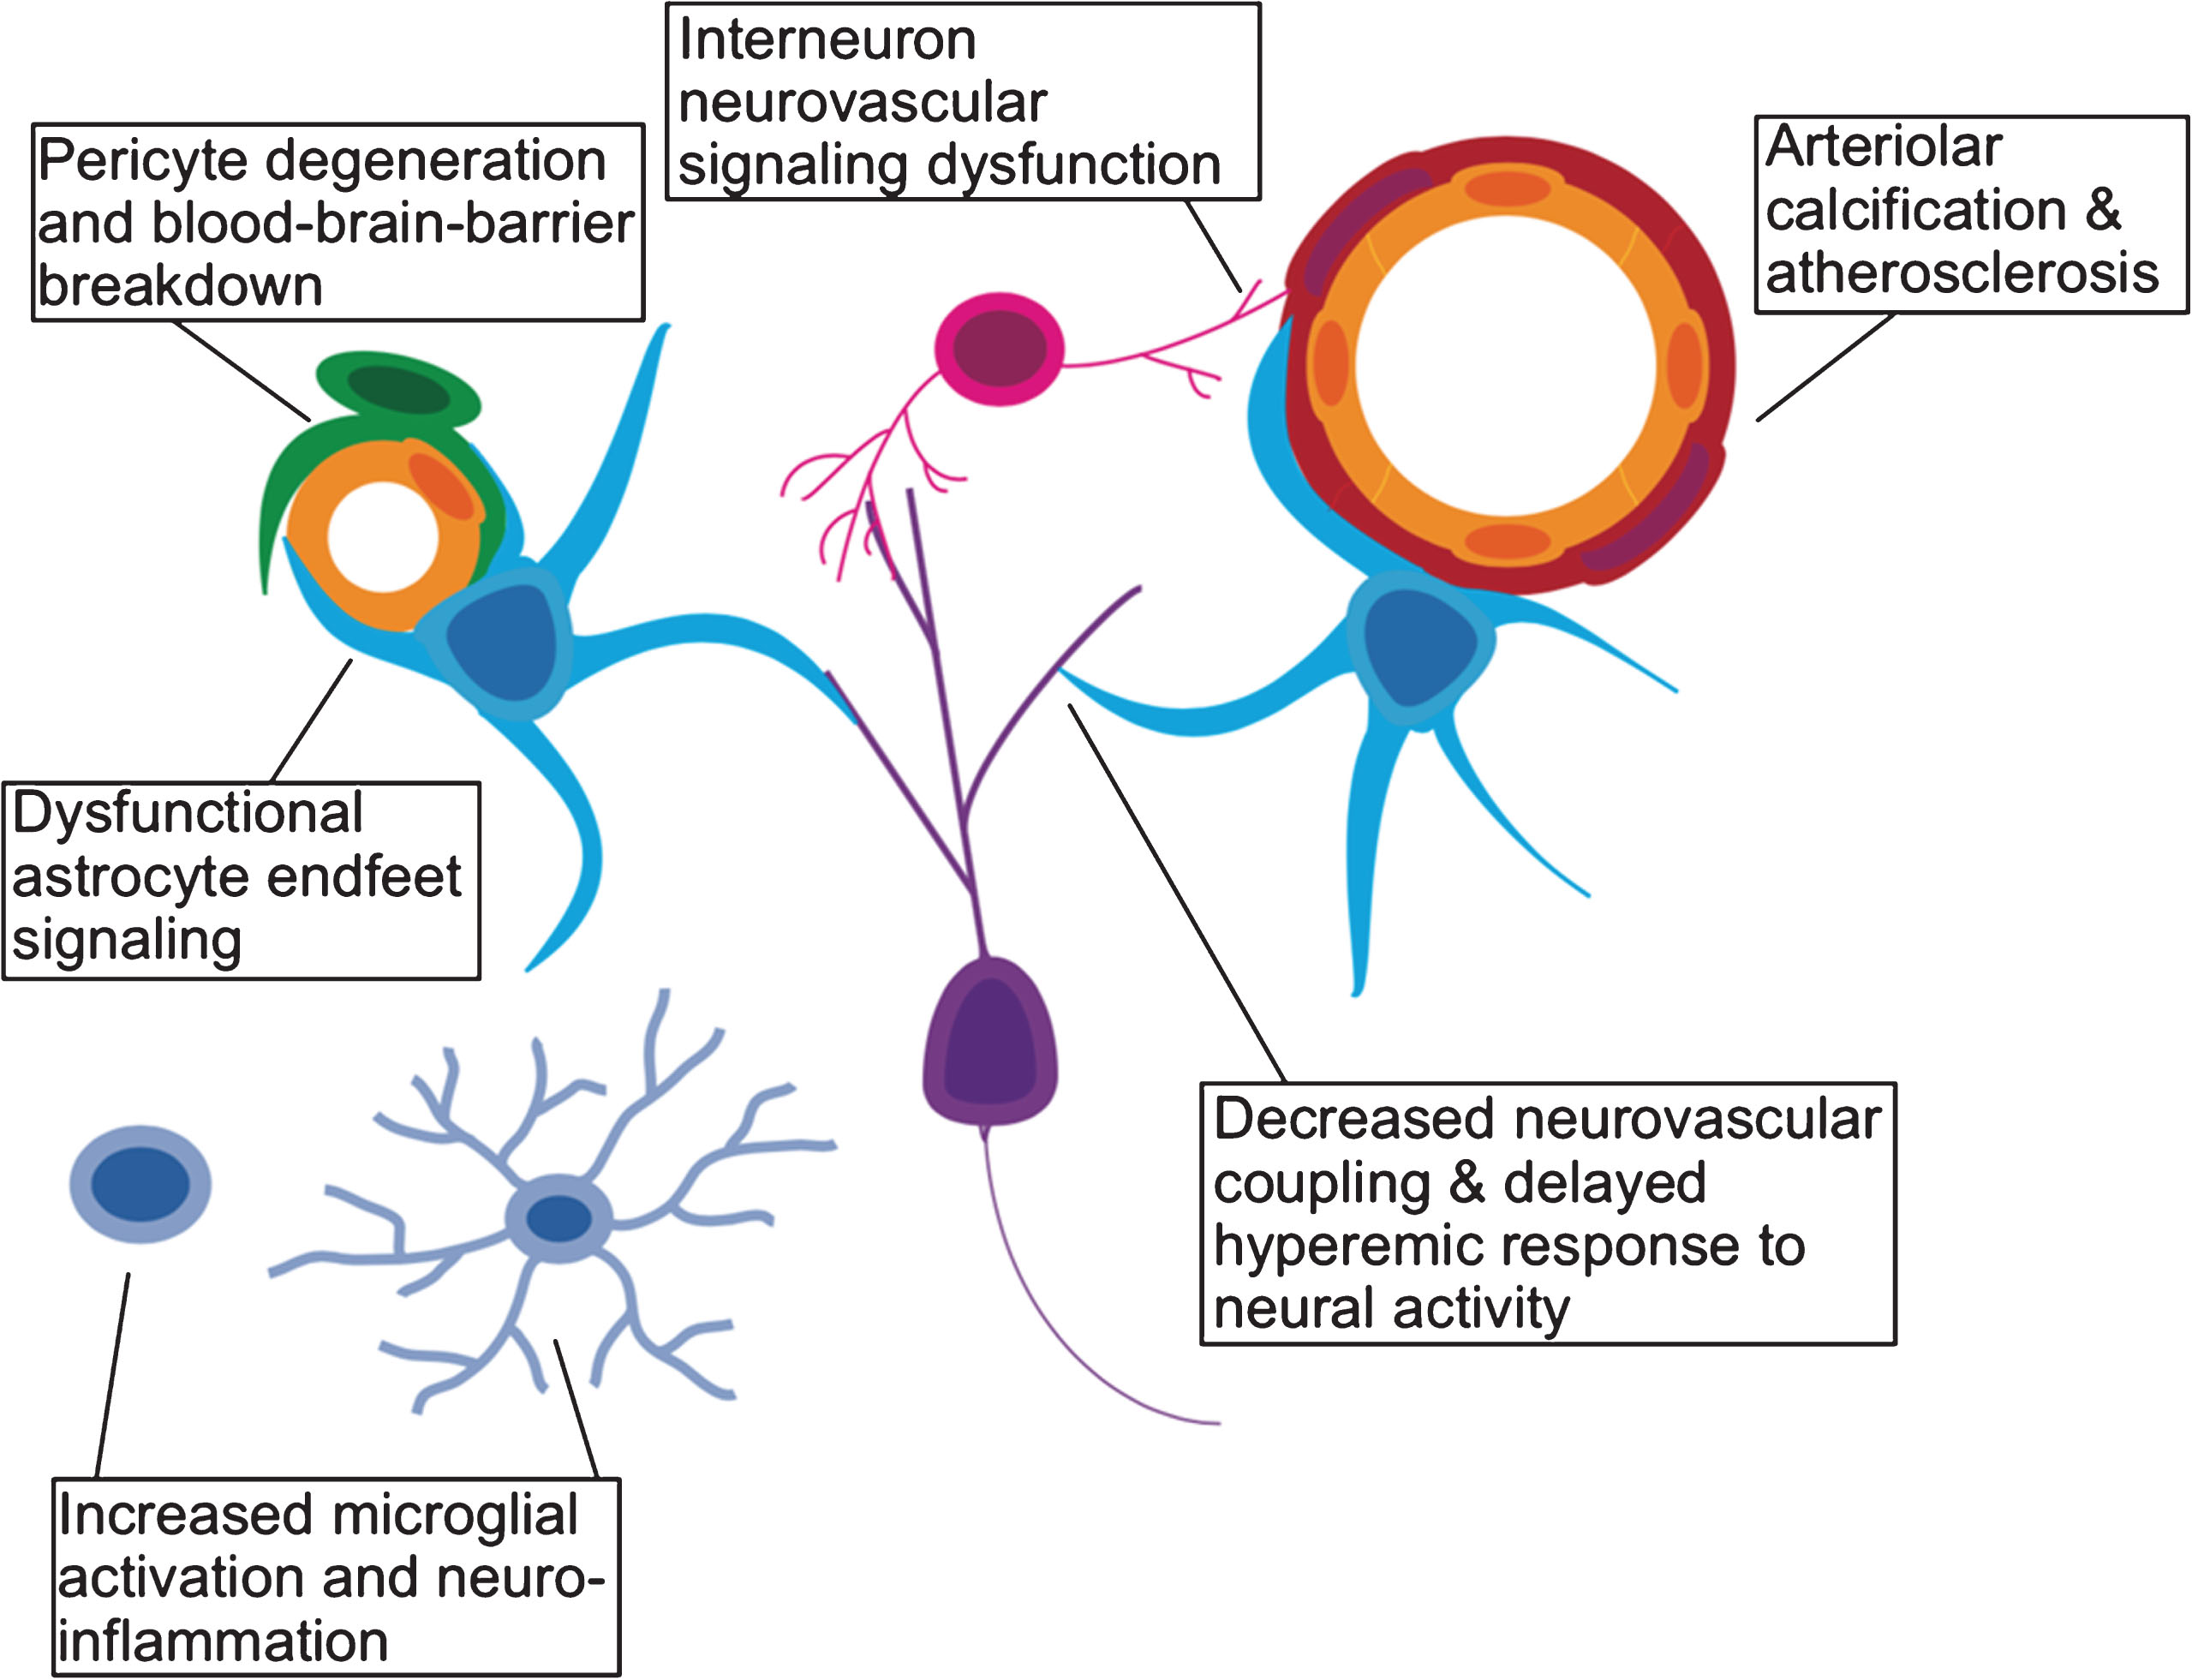 Effects of aging on the neurovascular unit. A schematic representation of the various components of the neurovascular unit including excitatory neurons (purple), interneurons (pink), microglia (light blue), astrocytes (cyan), pericytes (green), vascular endothelium (yellow), and vascular smooth muscle (red).